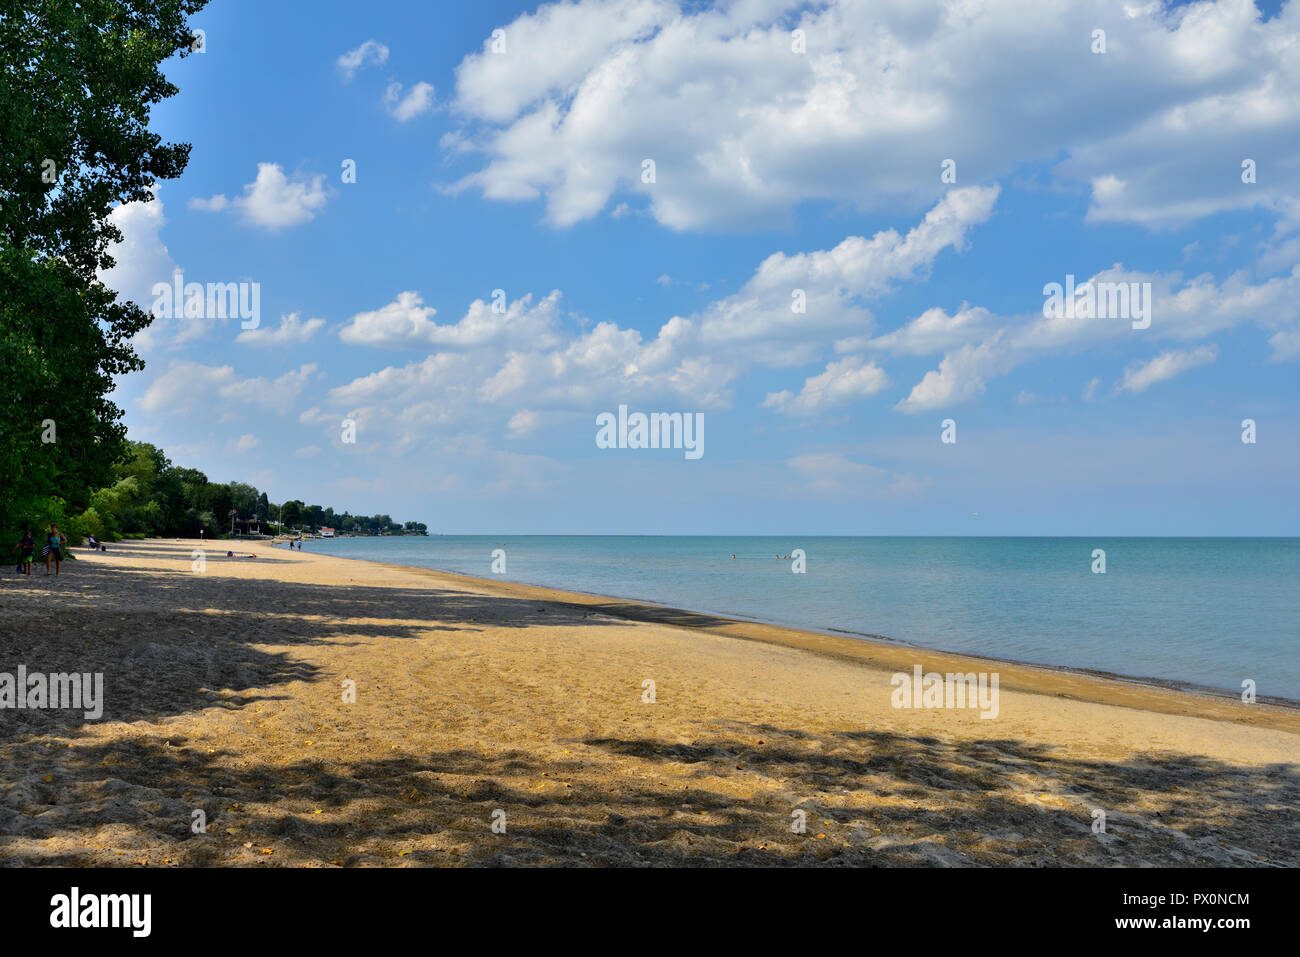 Nearly empty public beach on Lake Ontario, one of the Great Lakes, near Rochester, New York, USA Stock Photo